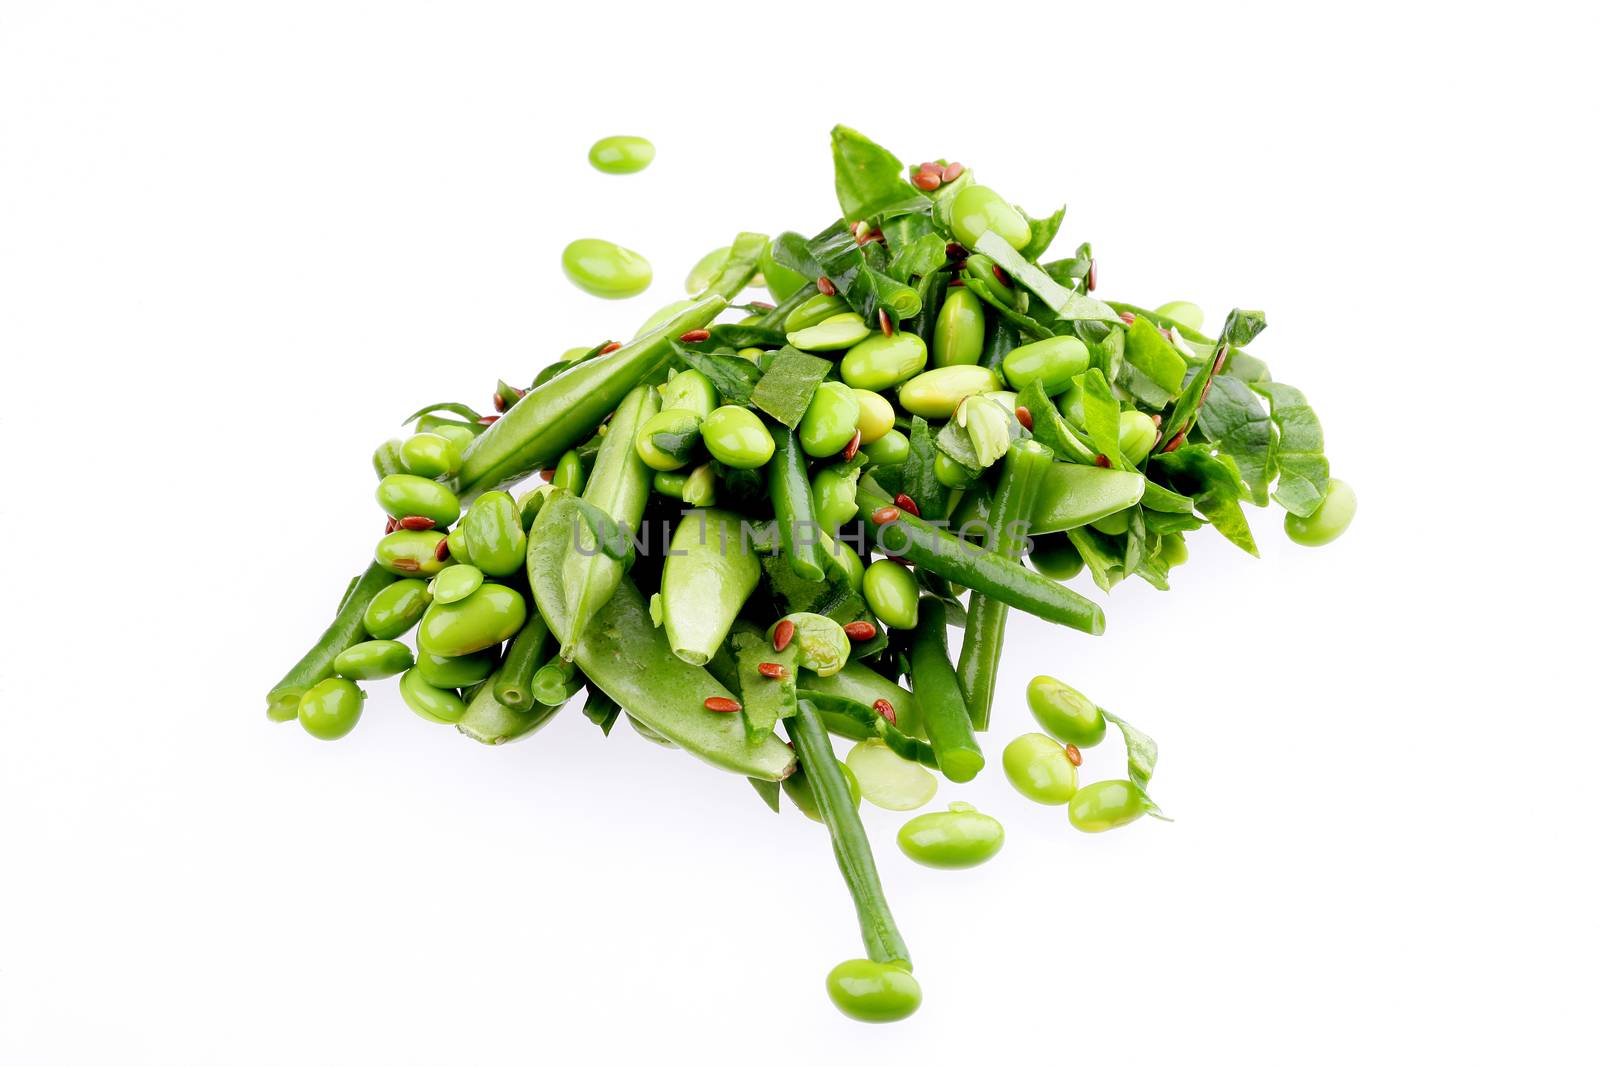 Green Bean and Soy Salad by Whiteboxmedia